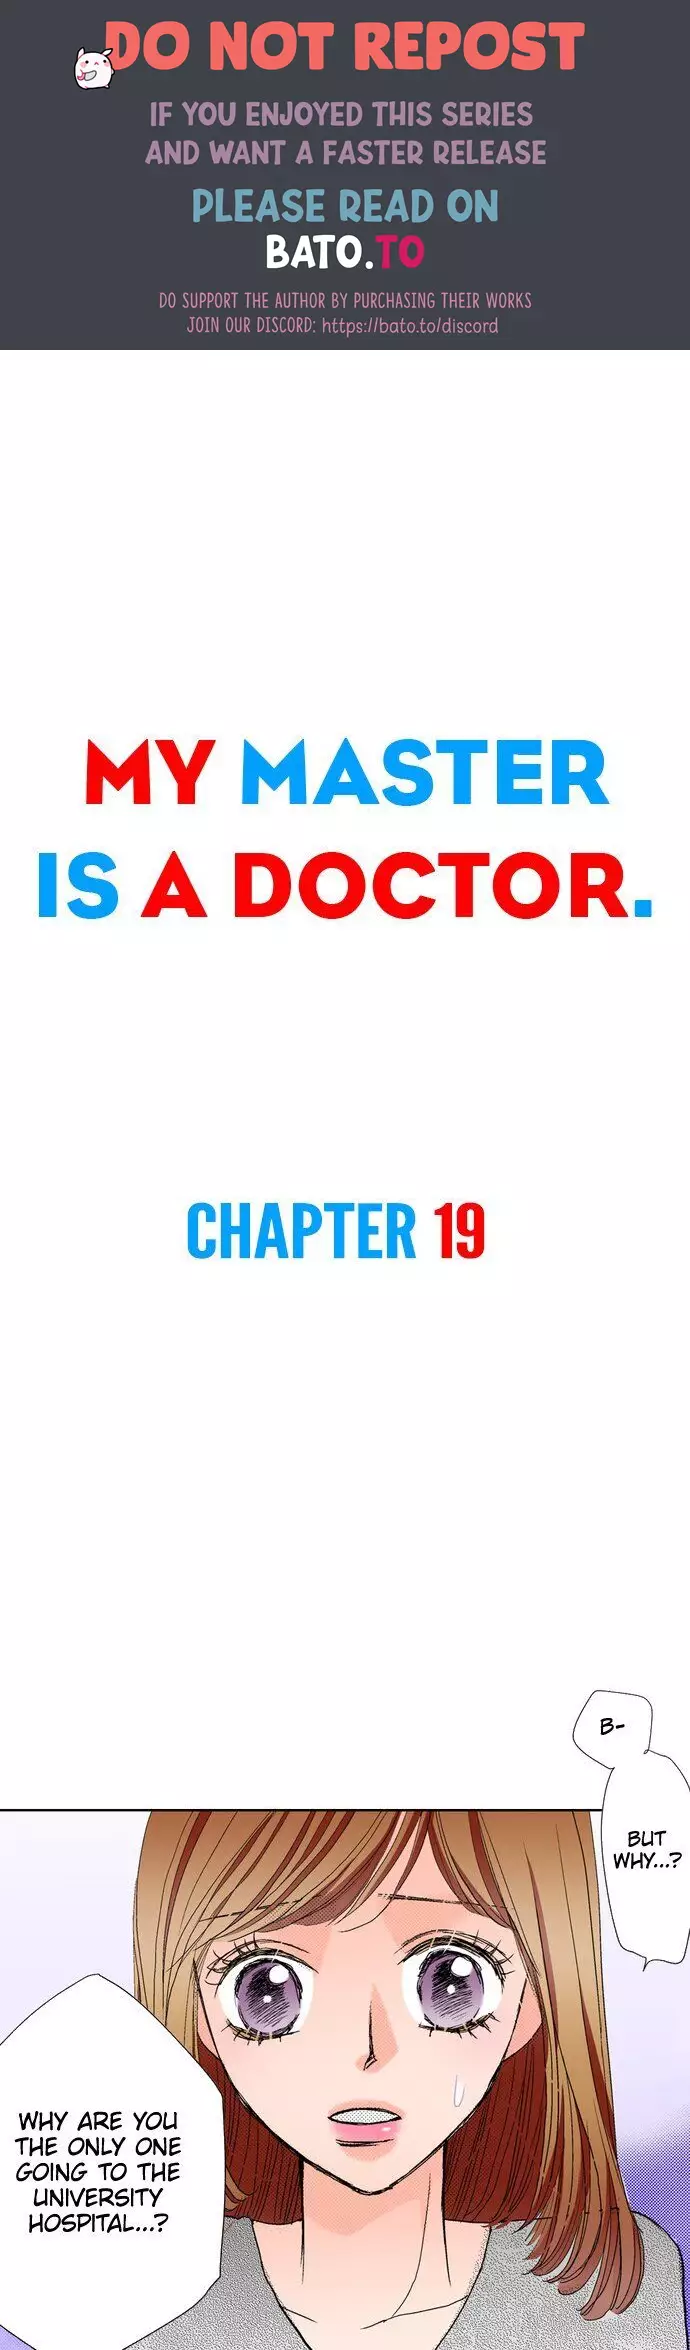 My Master Is A Doctor - 19 page 1-f64b2b63